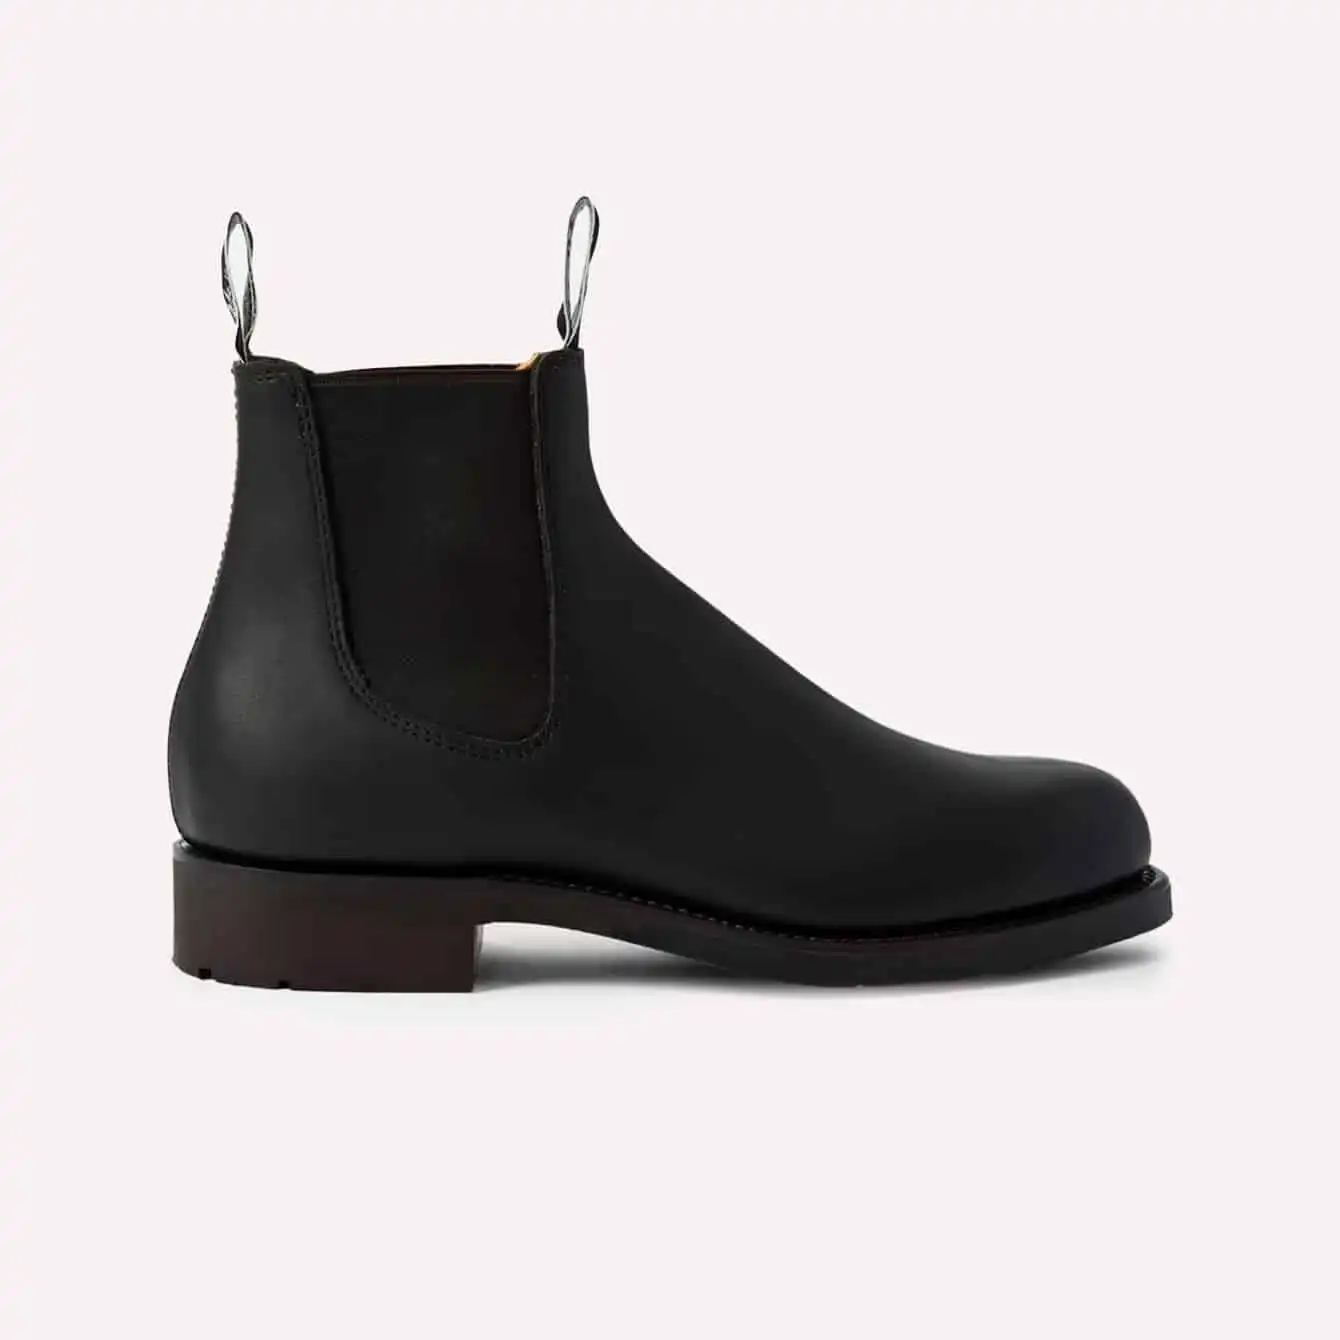 RM Williams - Gardener Whole-Cut Leather Chelsea Boots